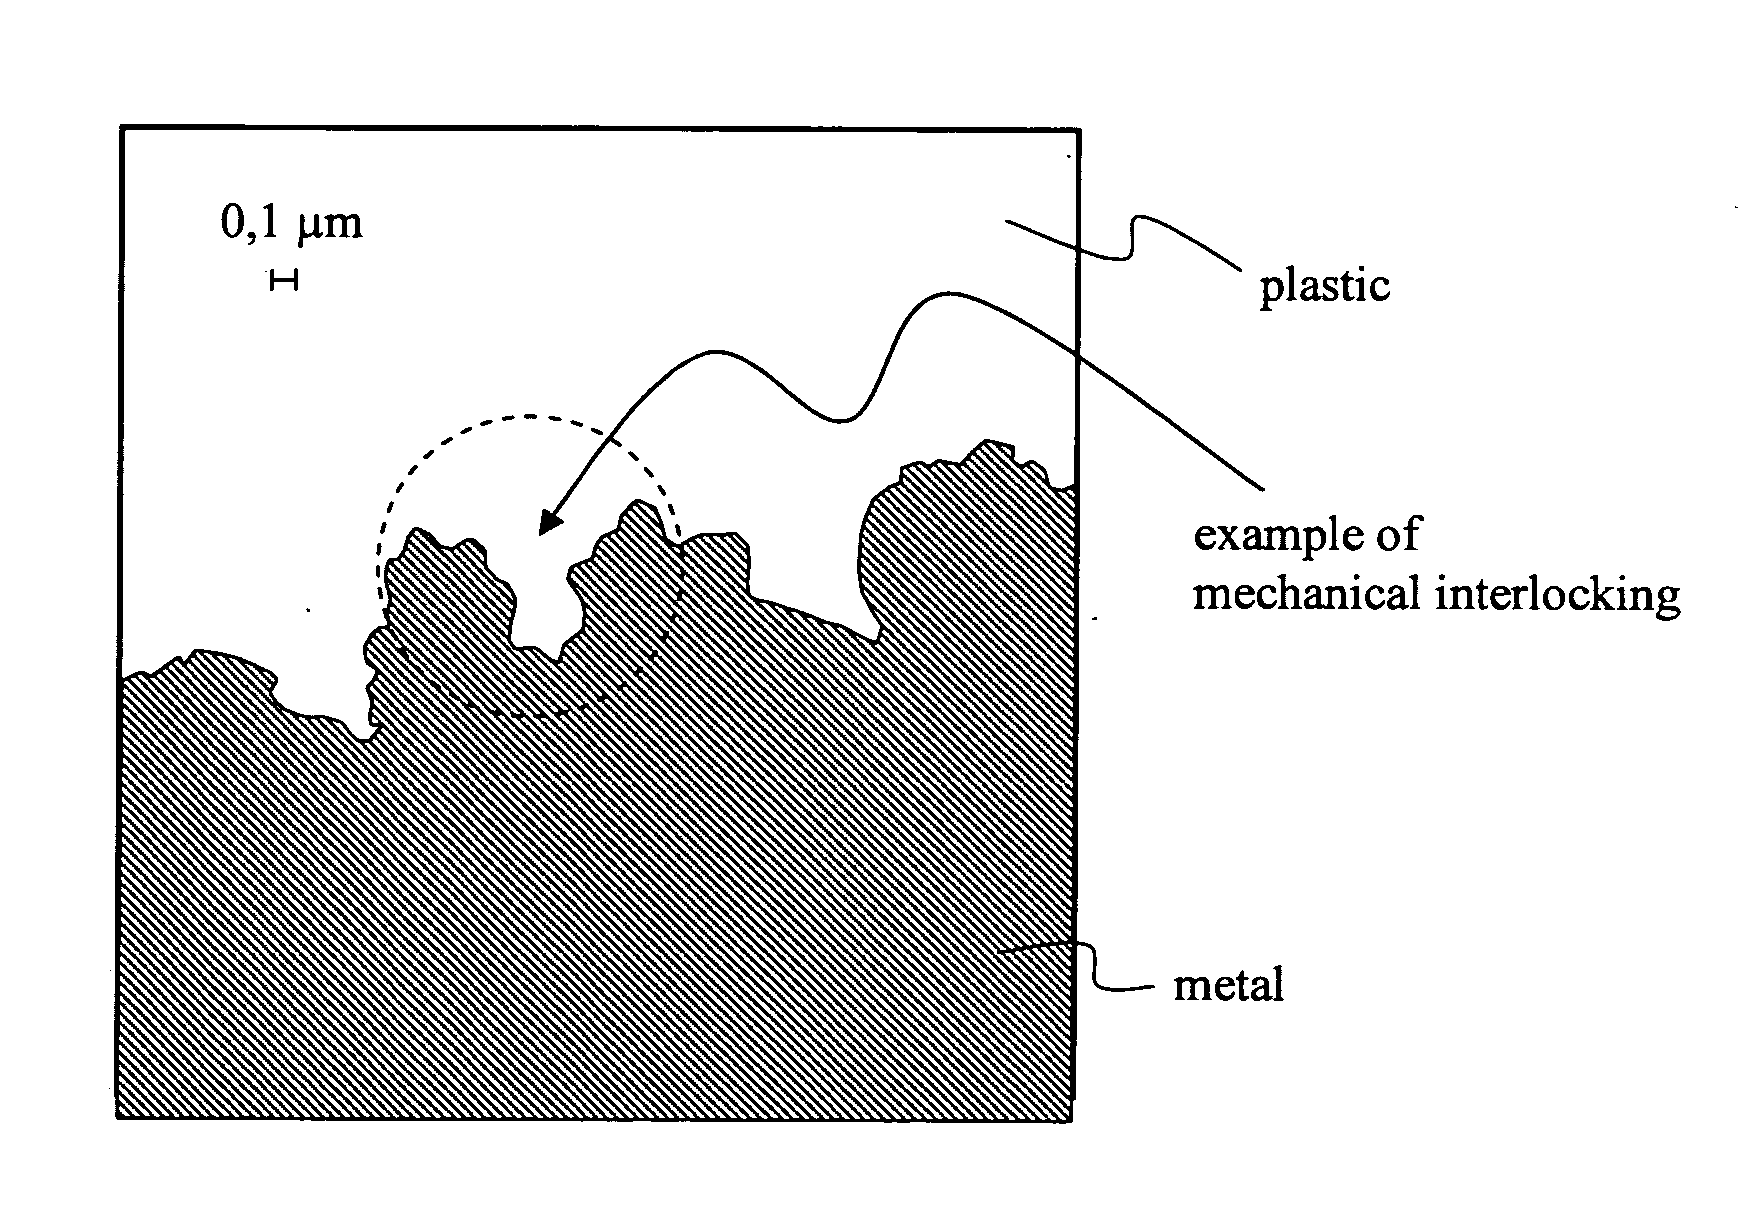 Plastic-acceptor hybrid components